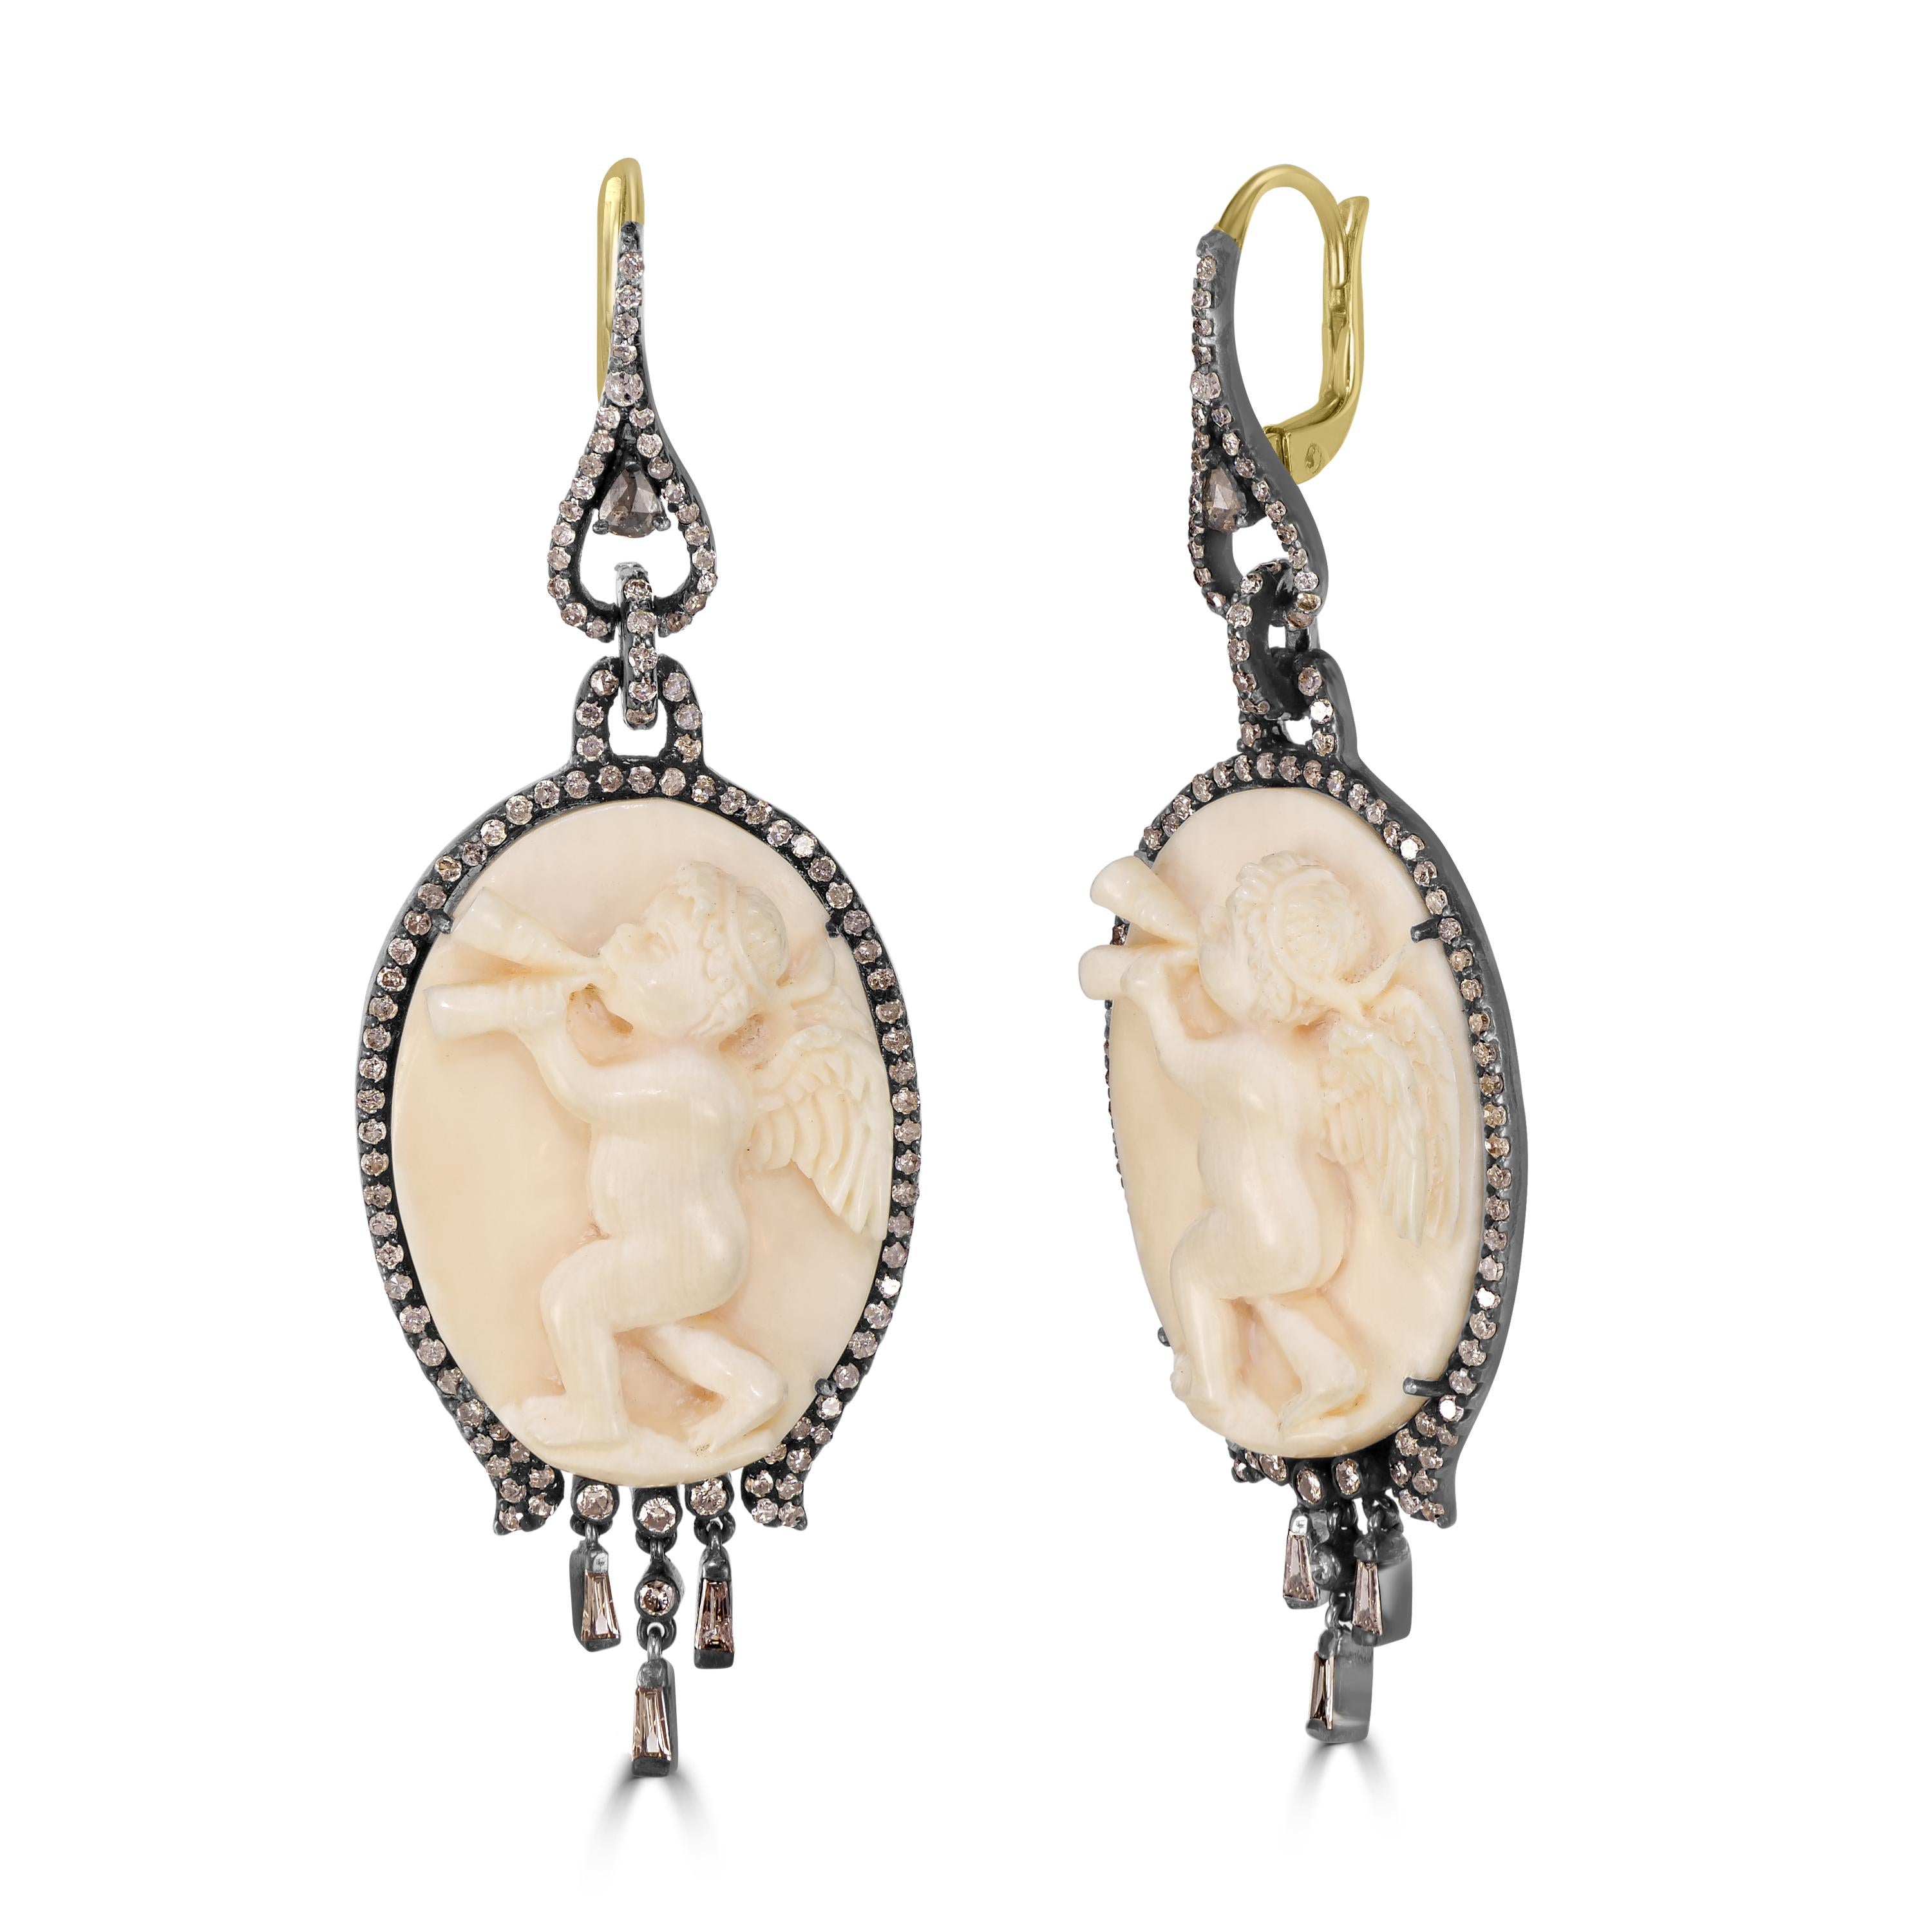 Introducing our Victorian 42.34 Cttw. Ivory Mammoth and Diamond Dangle Earrings – a unique and extraordinary piece of jewelry that exudes timeless elegance and charm.

These stunning earrings feature oval-shaped ivory Mammoth as the centerpiece,